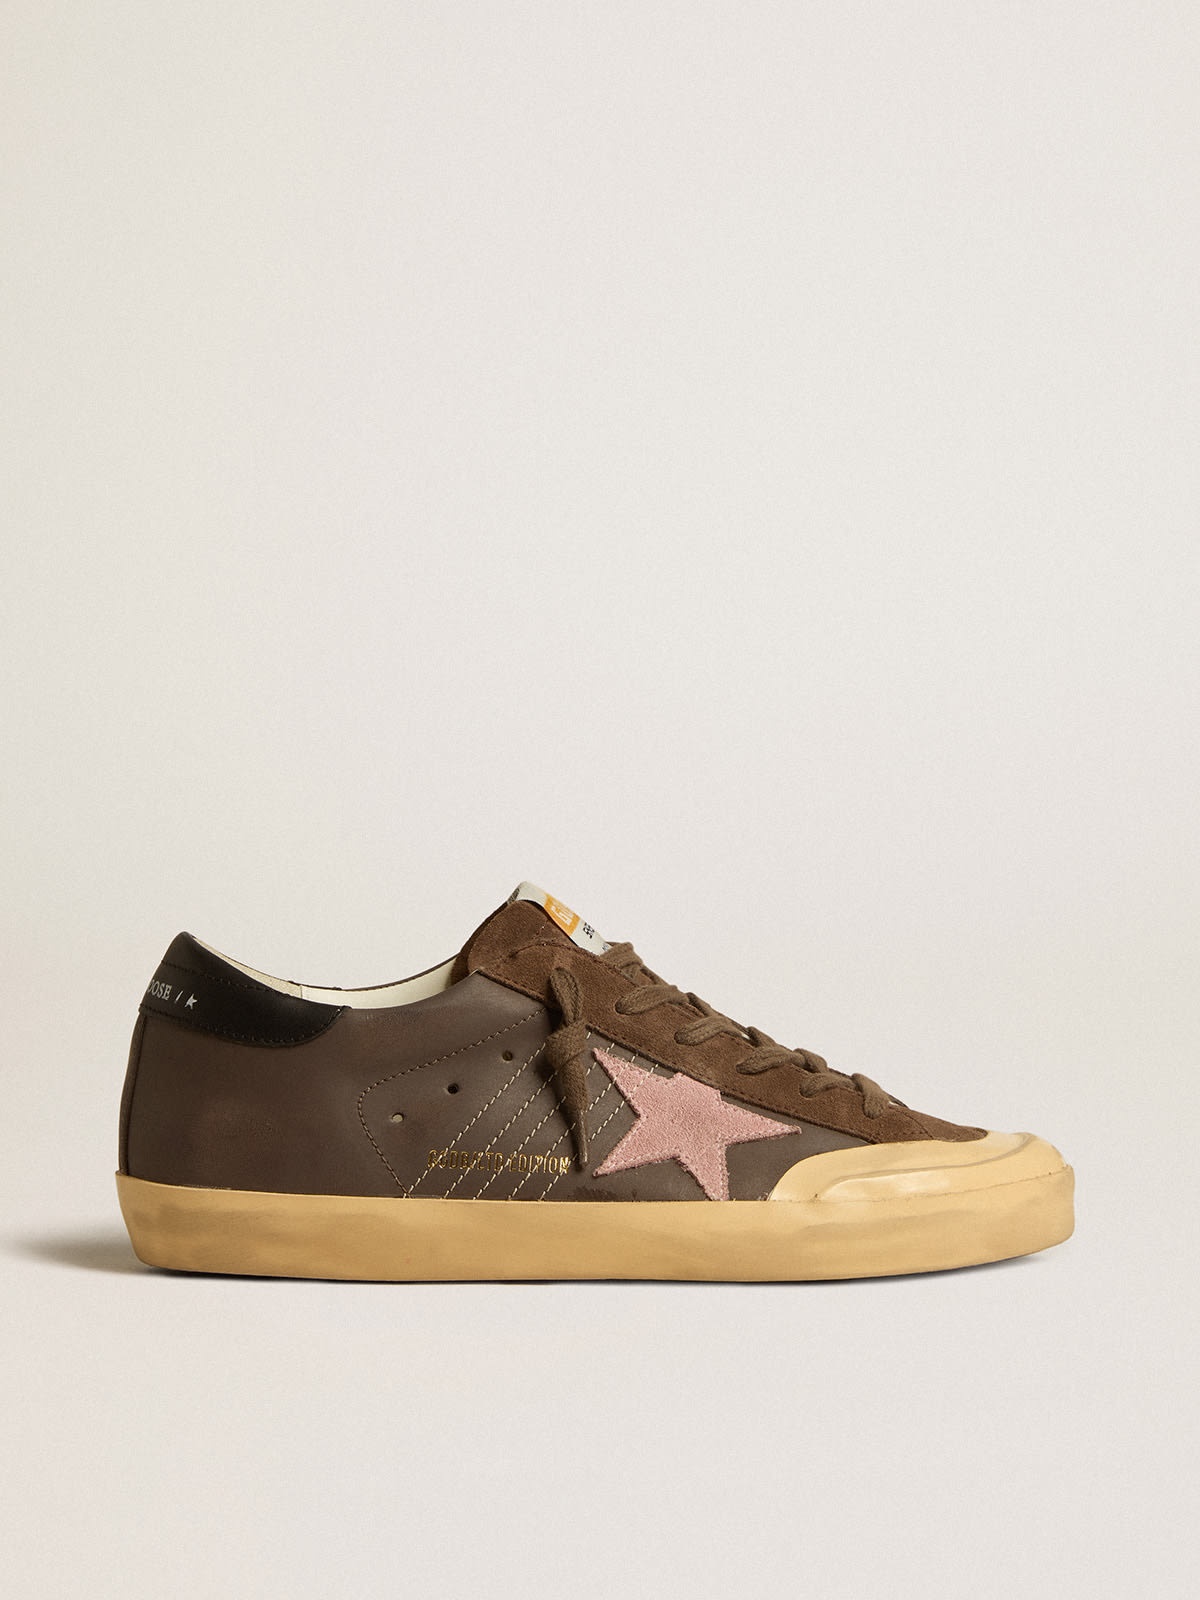 Super-Star Penstar LTD in brown leather with pink suede star - 1